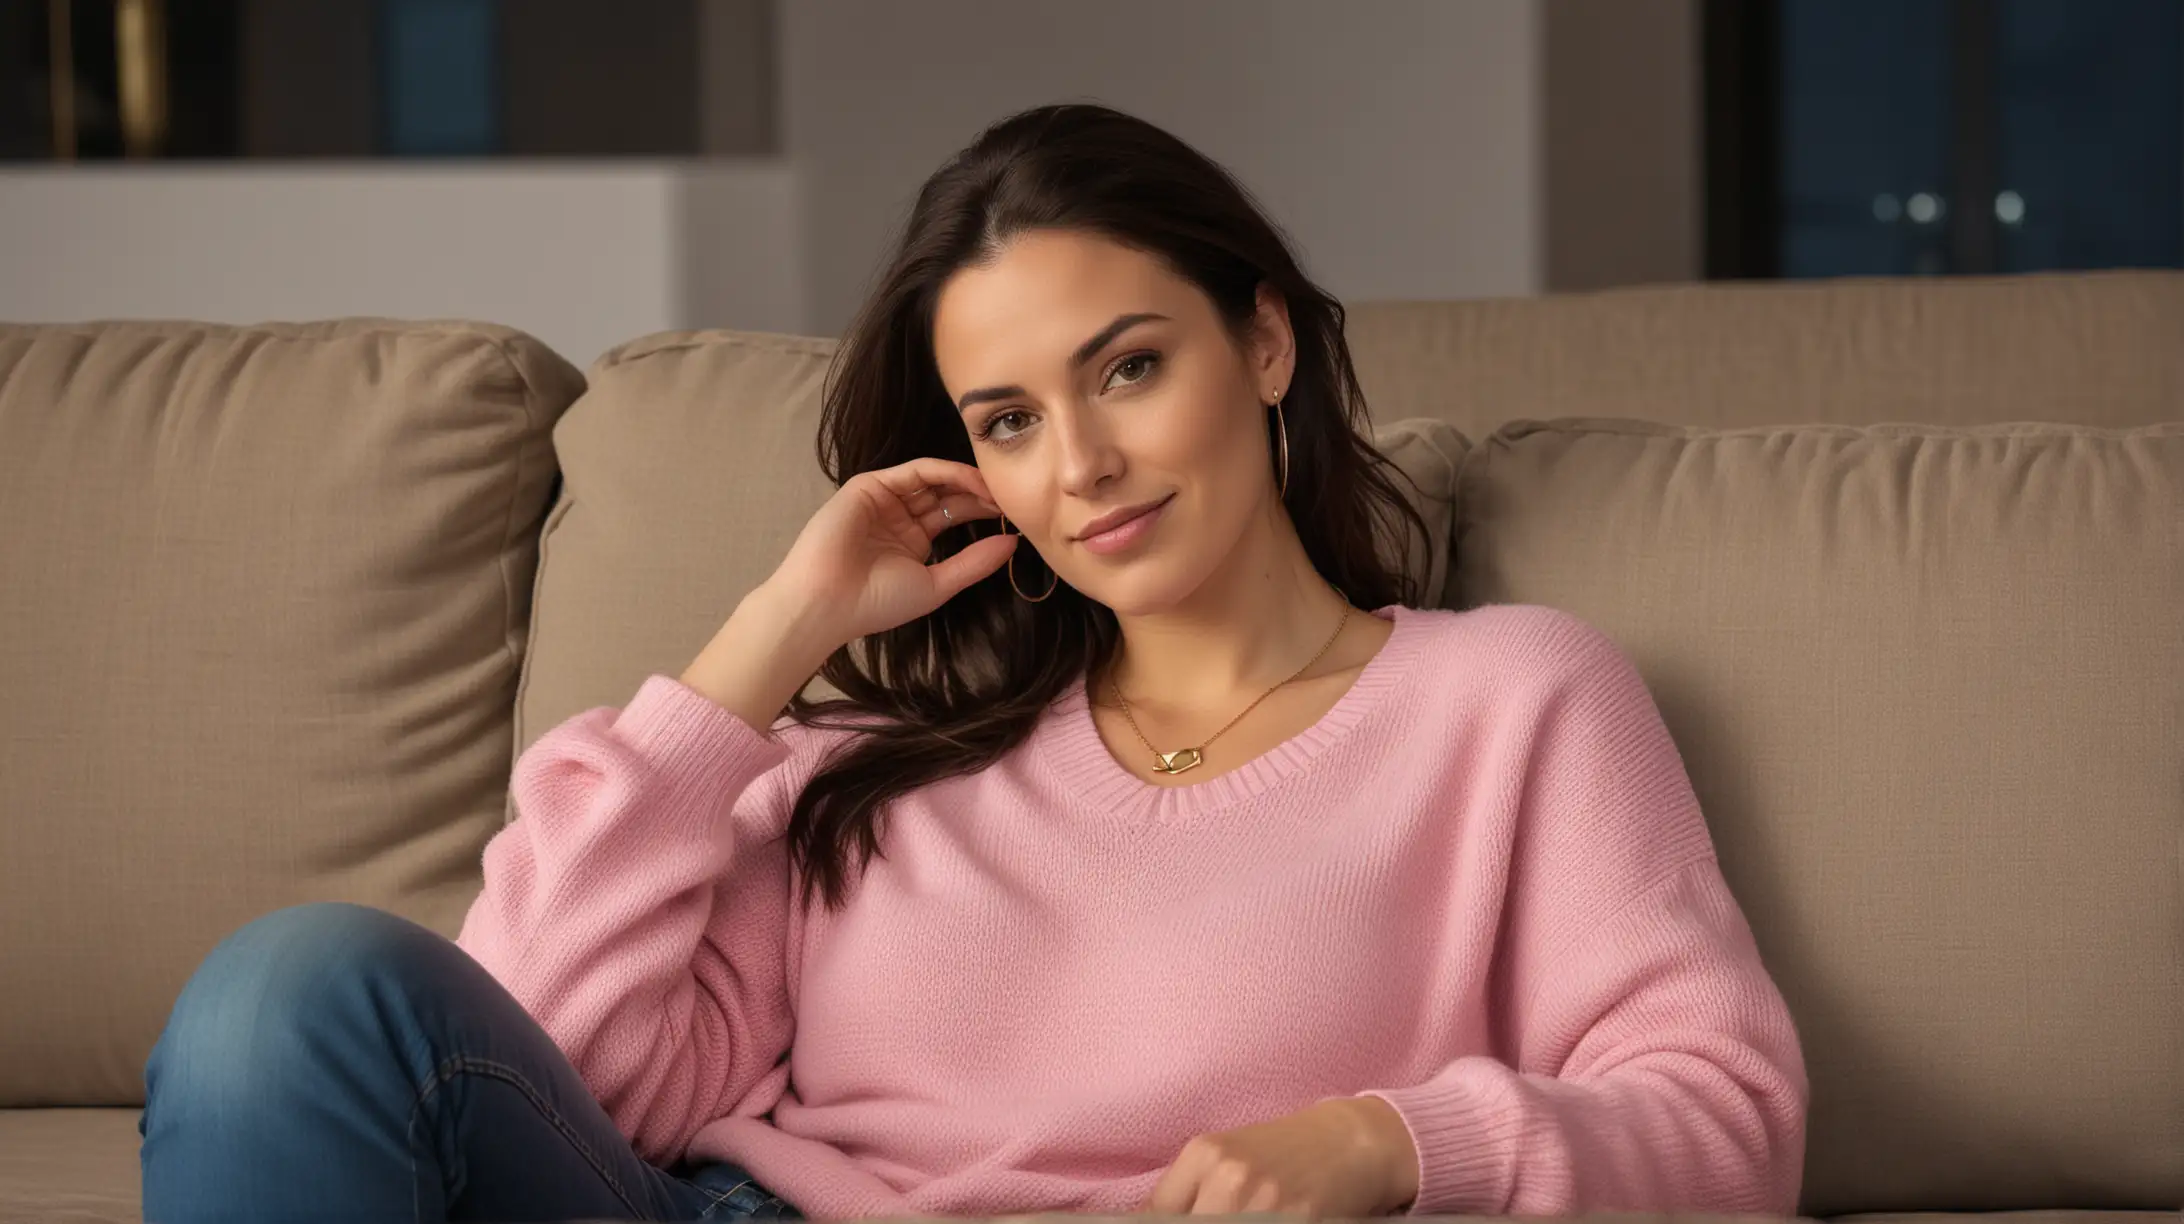 Closeup view of 30 year old white woman with long dark brown hair, simple gold necklace, pink sweater and blue jeans, lying on a couch in a modern apartment at night